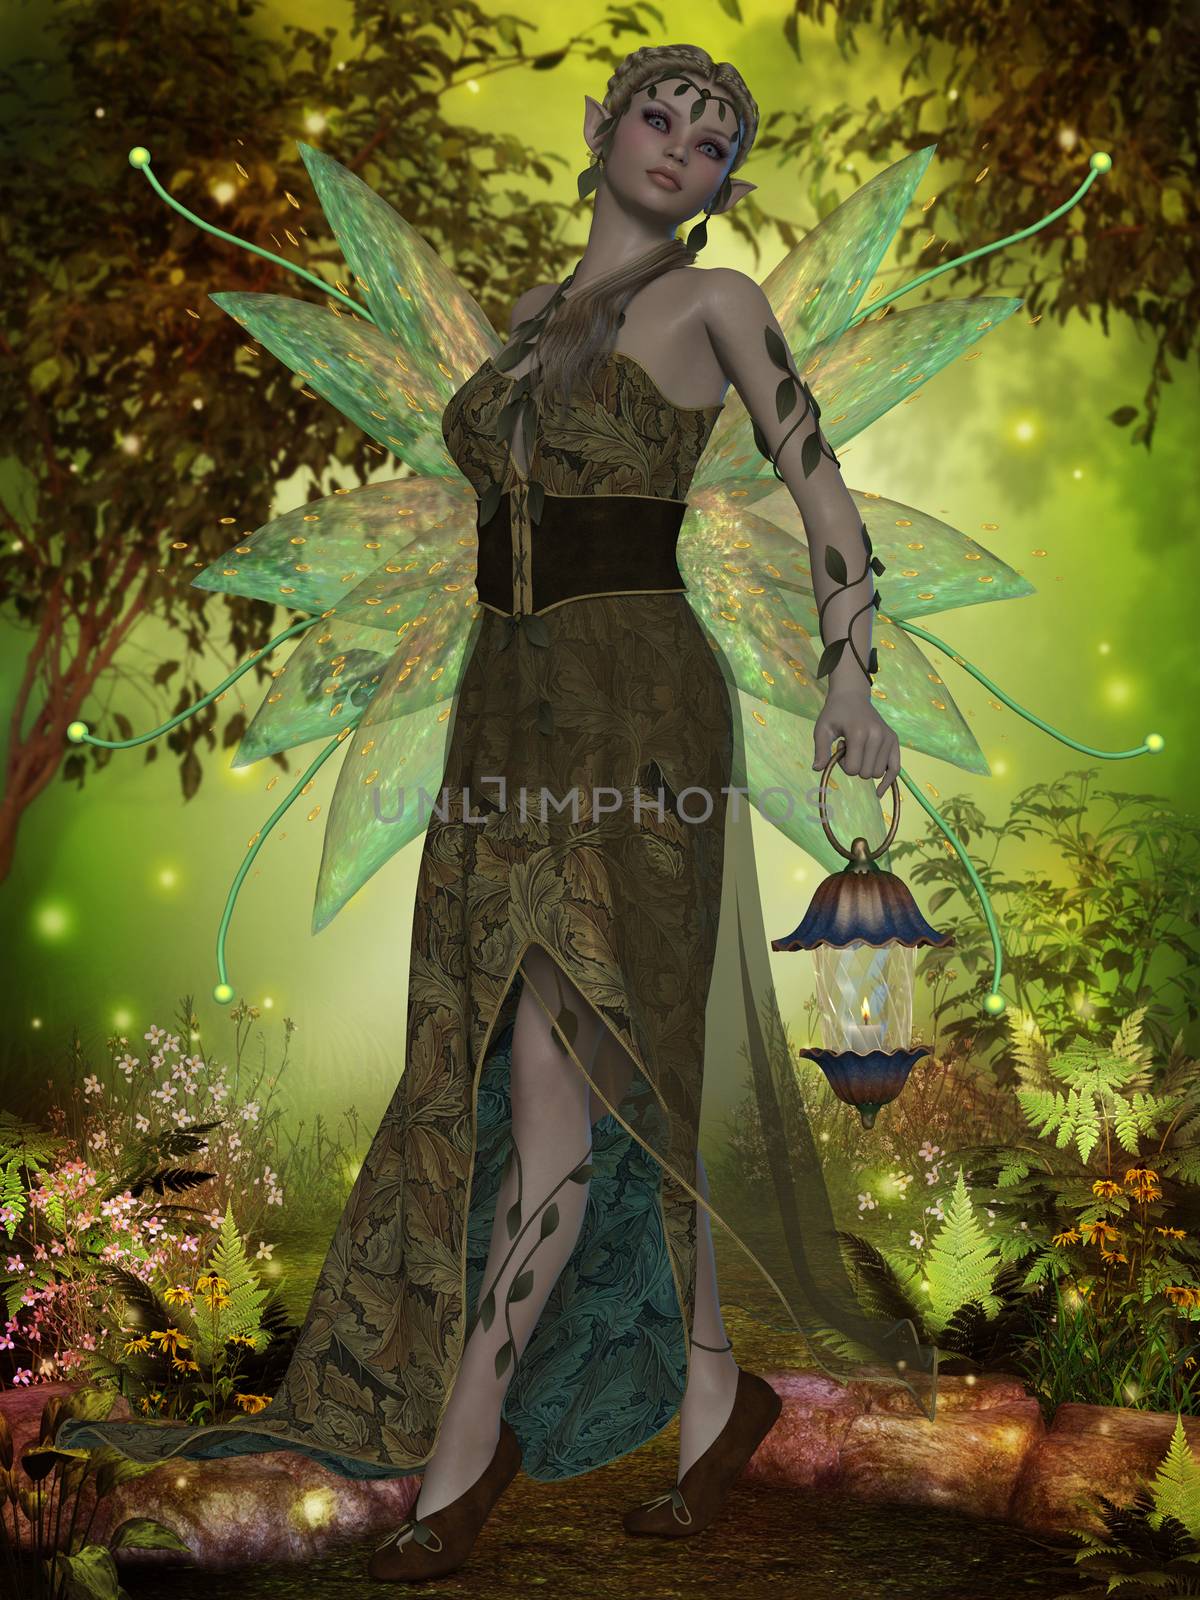 A fairy with iridescent wings carries a lantern through the magical forest.